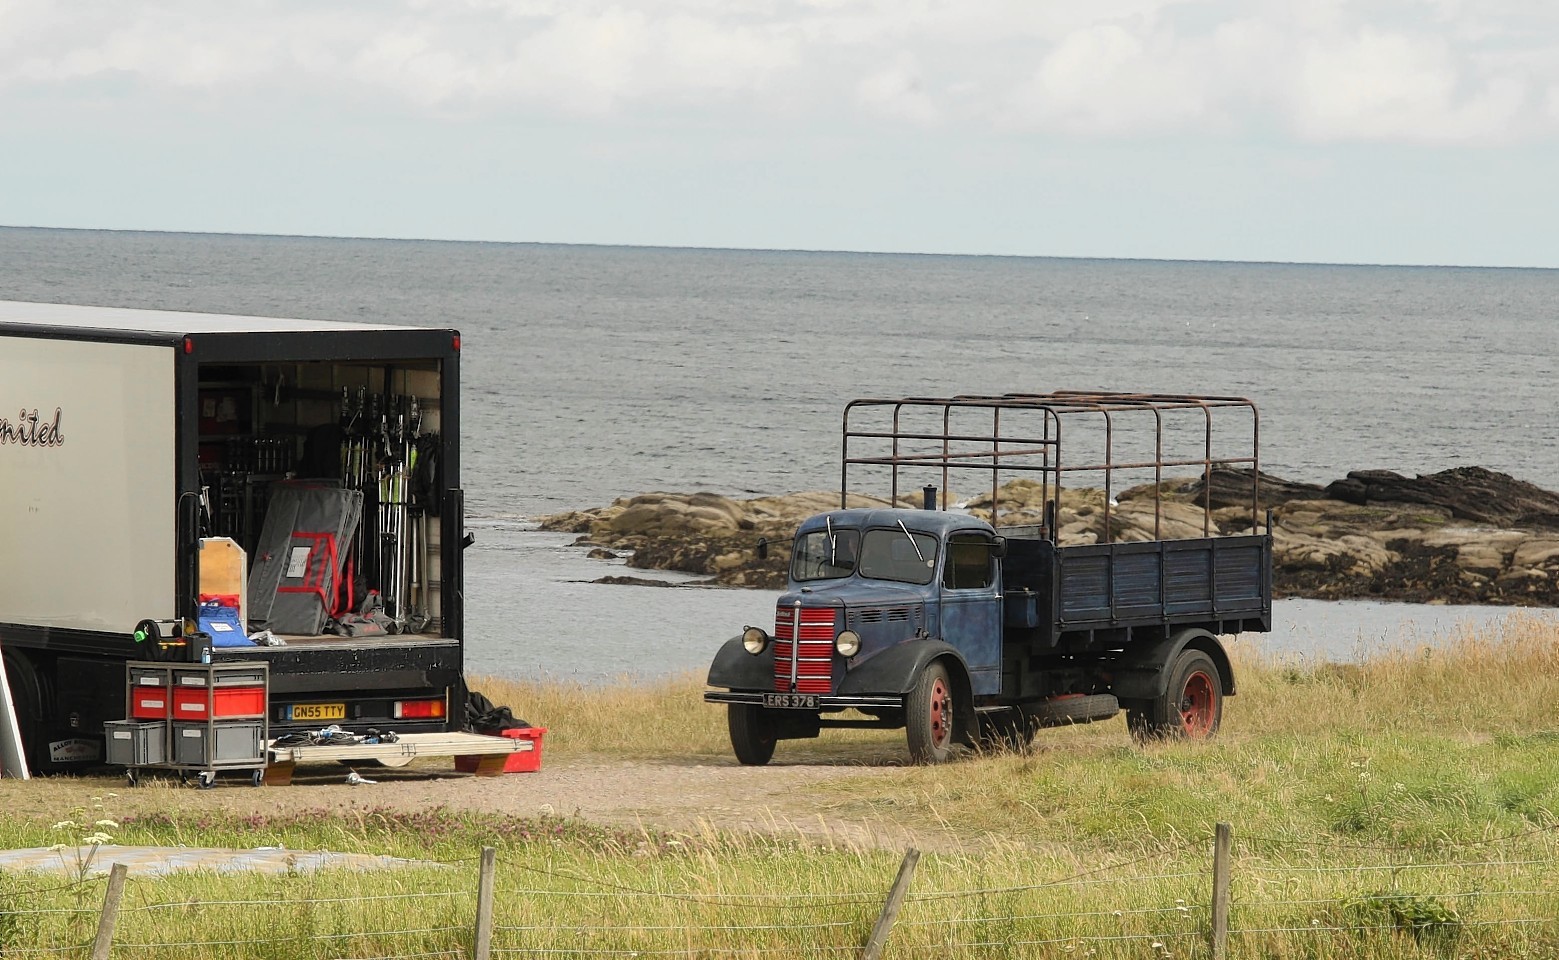 Pictures of the beginning of filming of Whisky Galore  at Portsoy